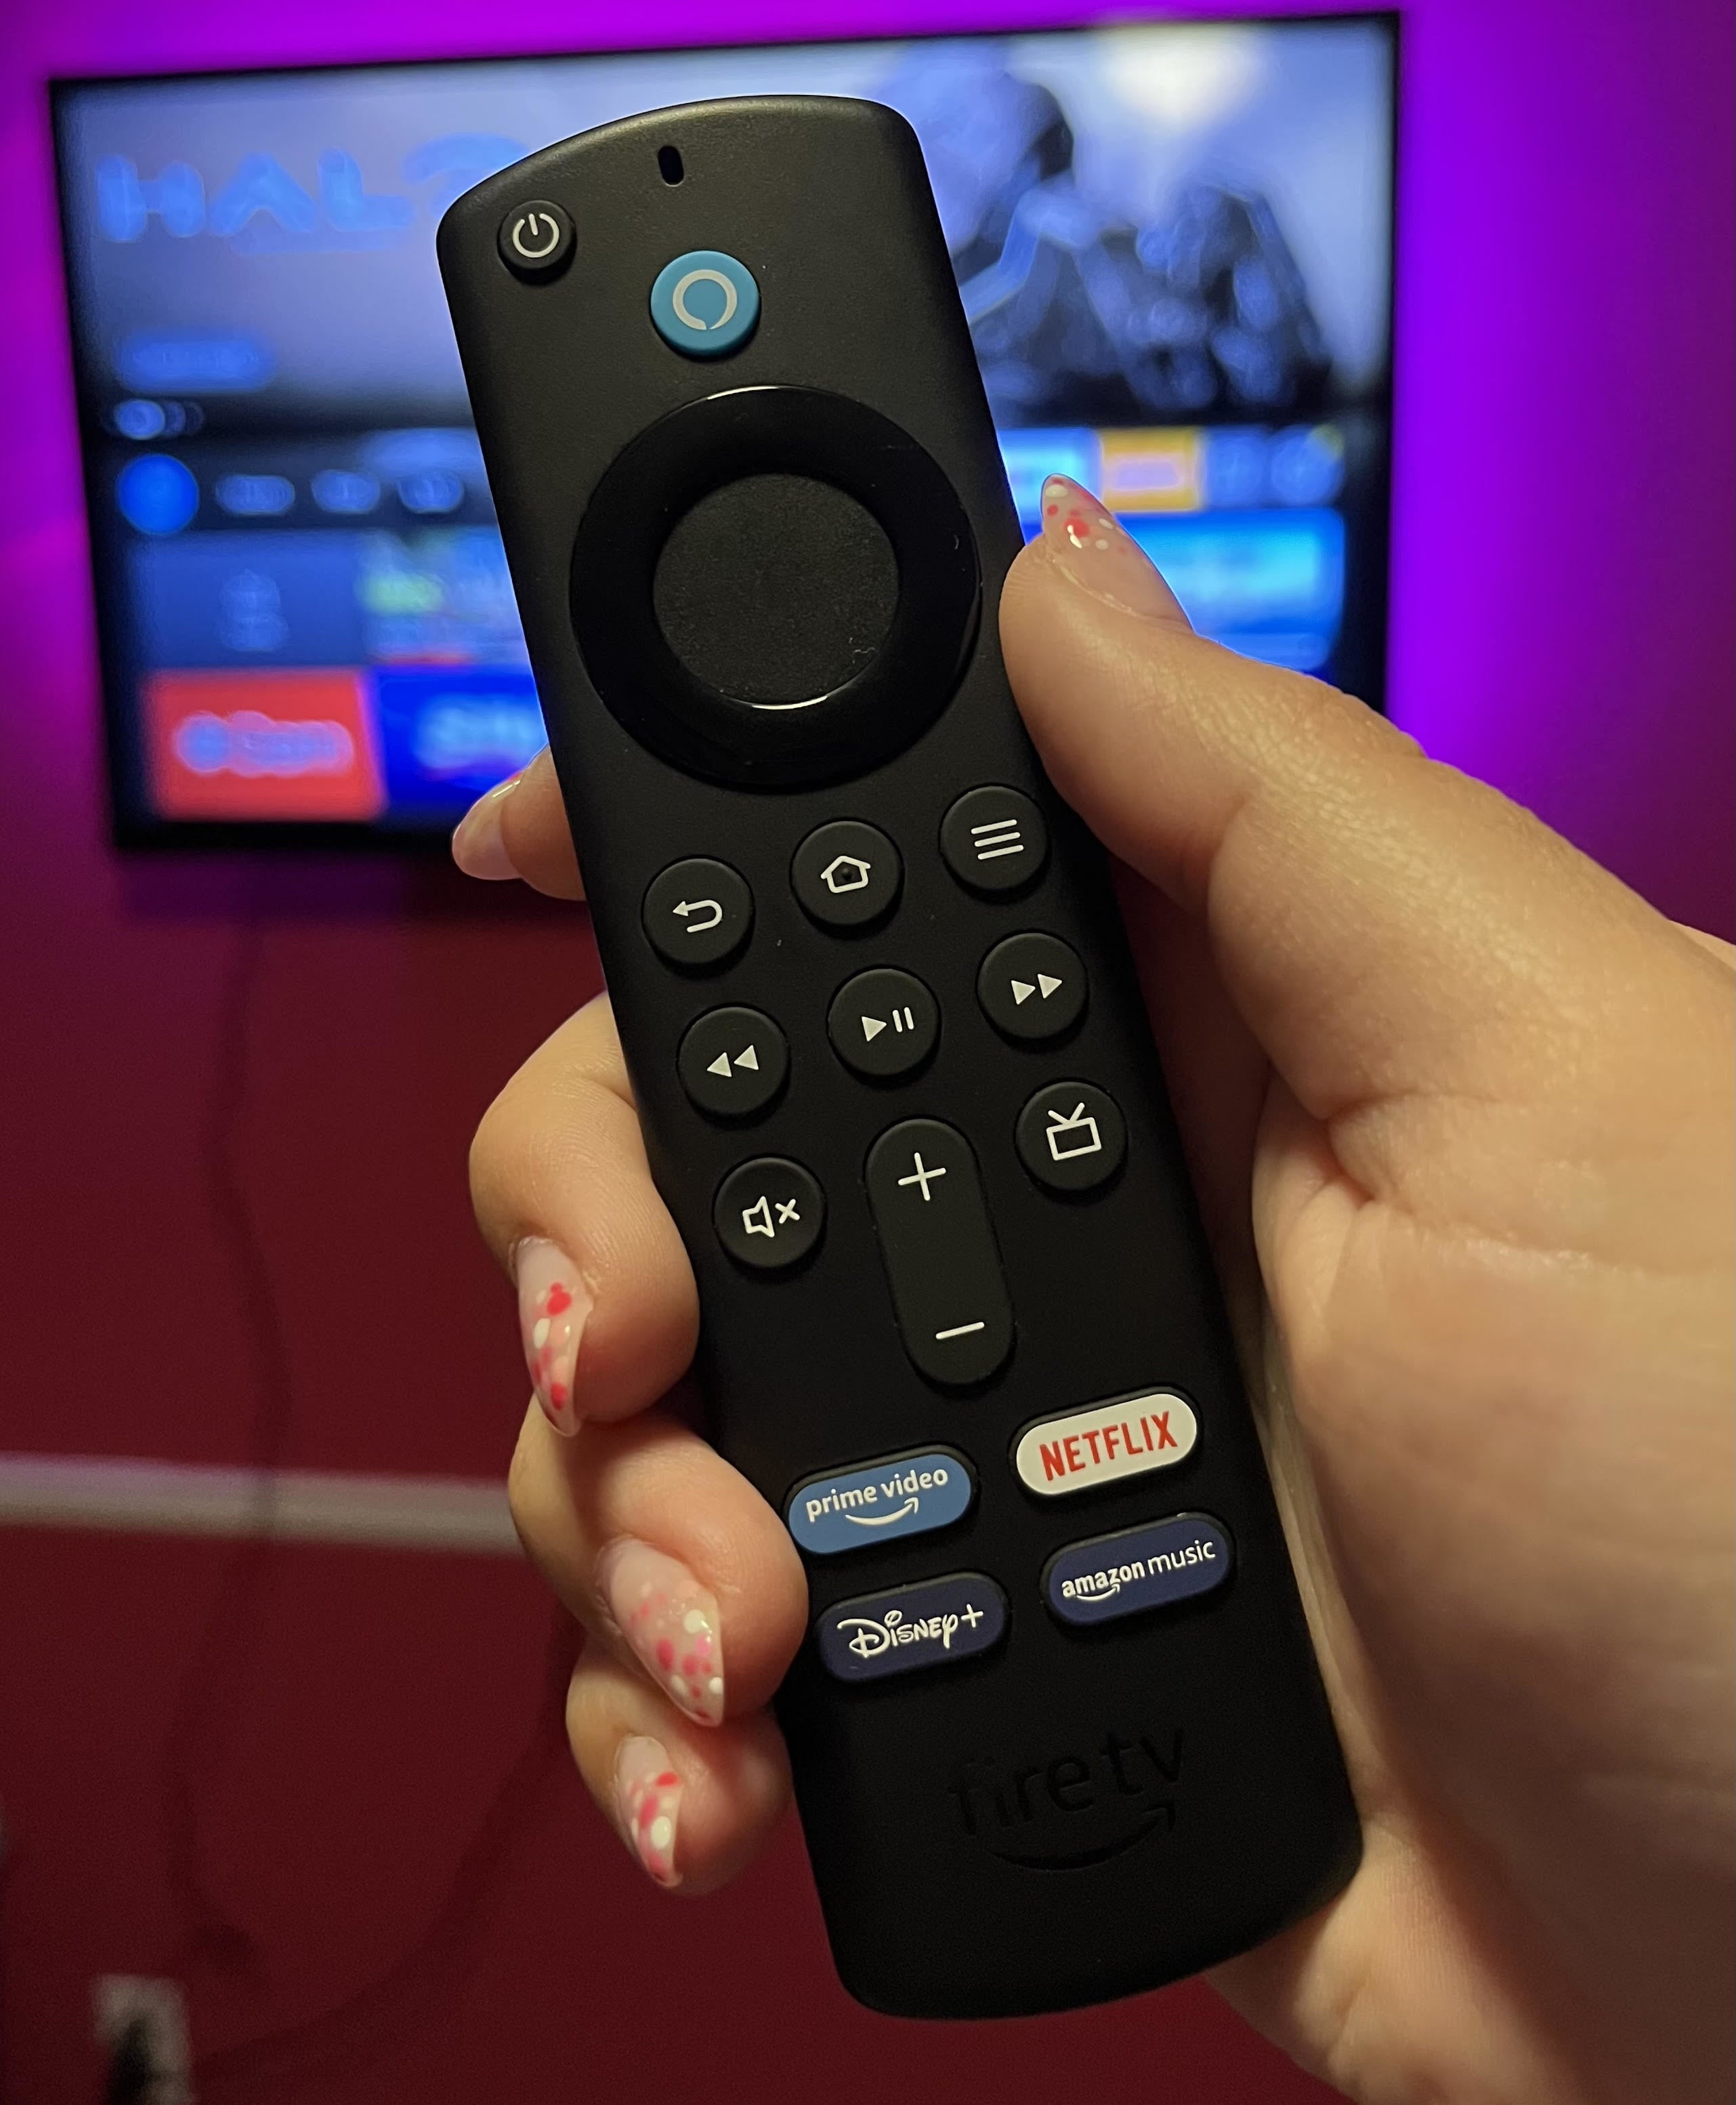 Bianca holding up the Fire TV Stick remote in front of the television